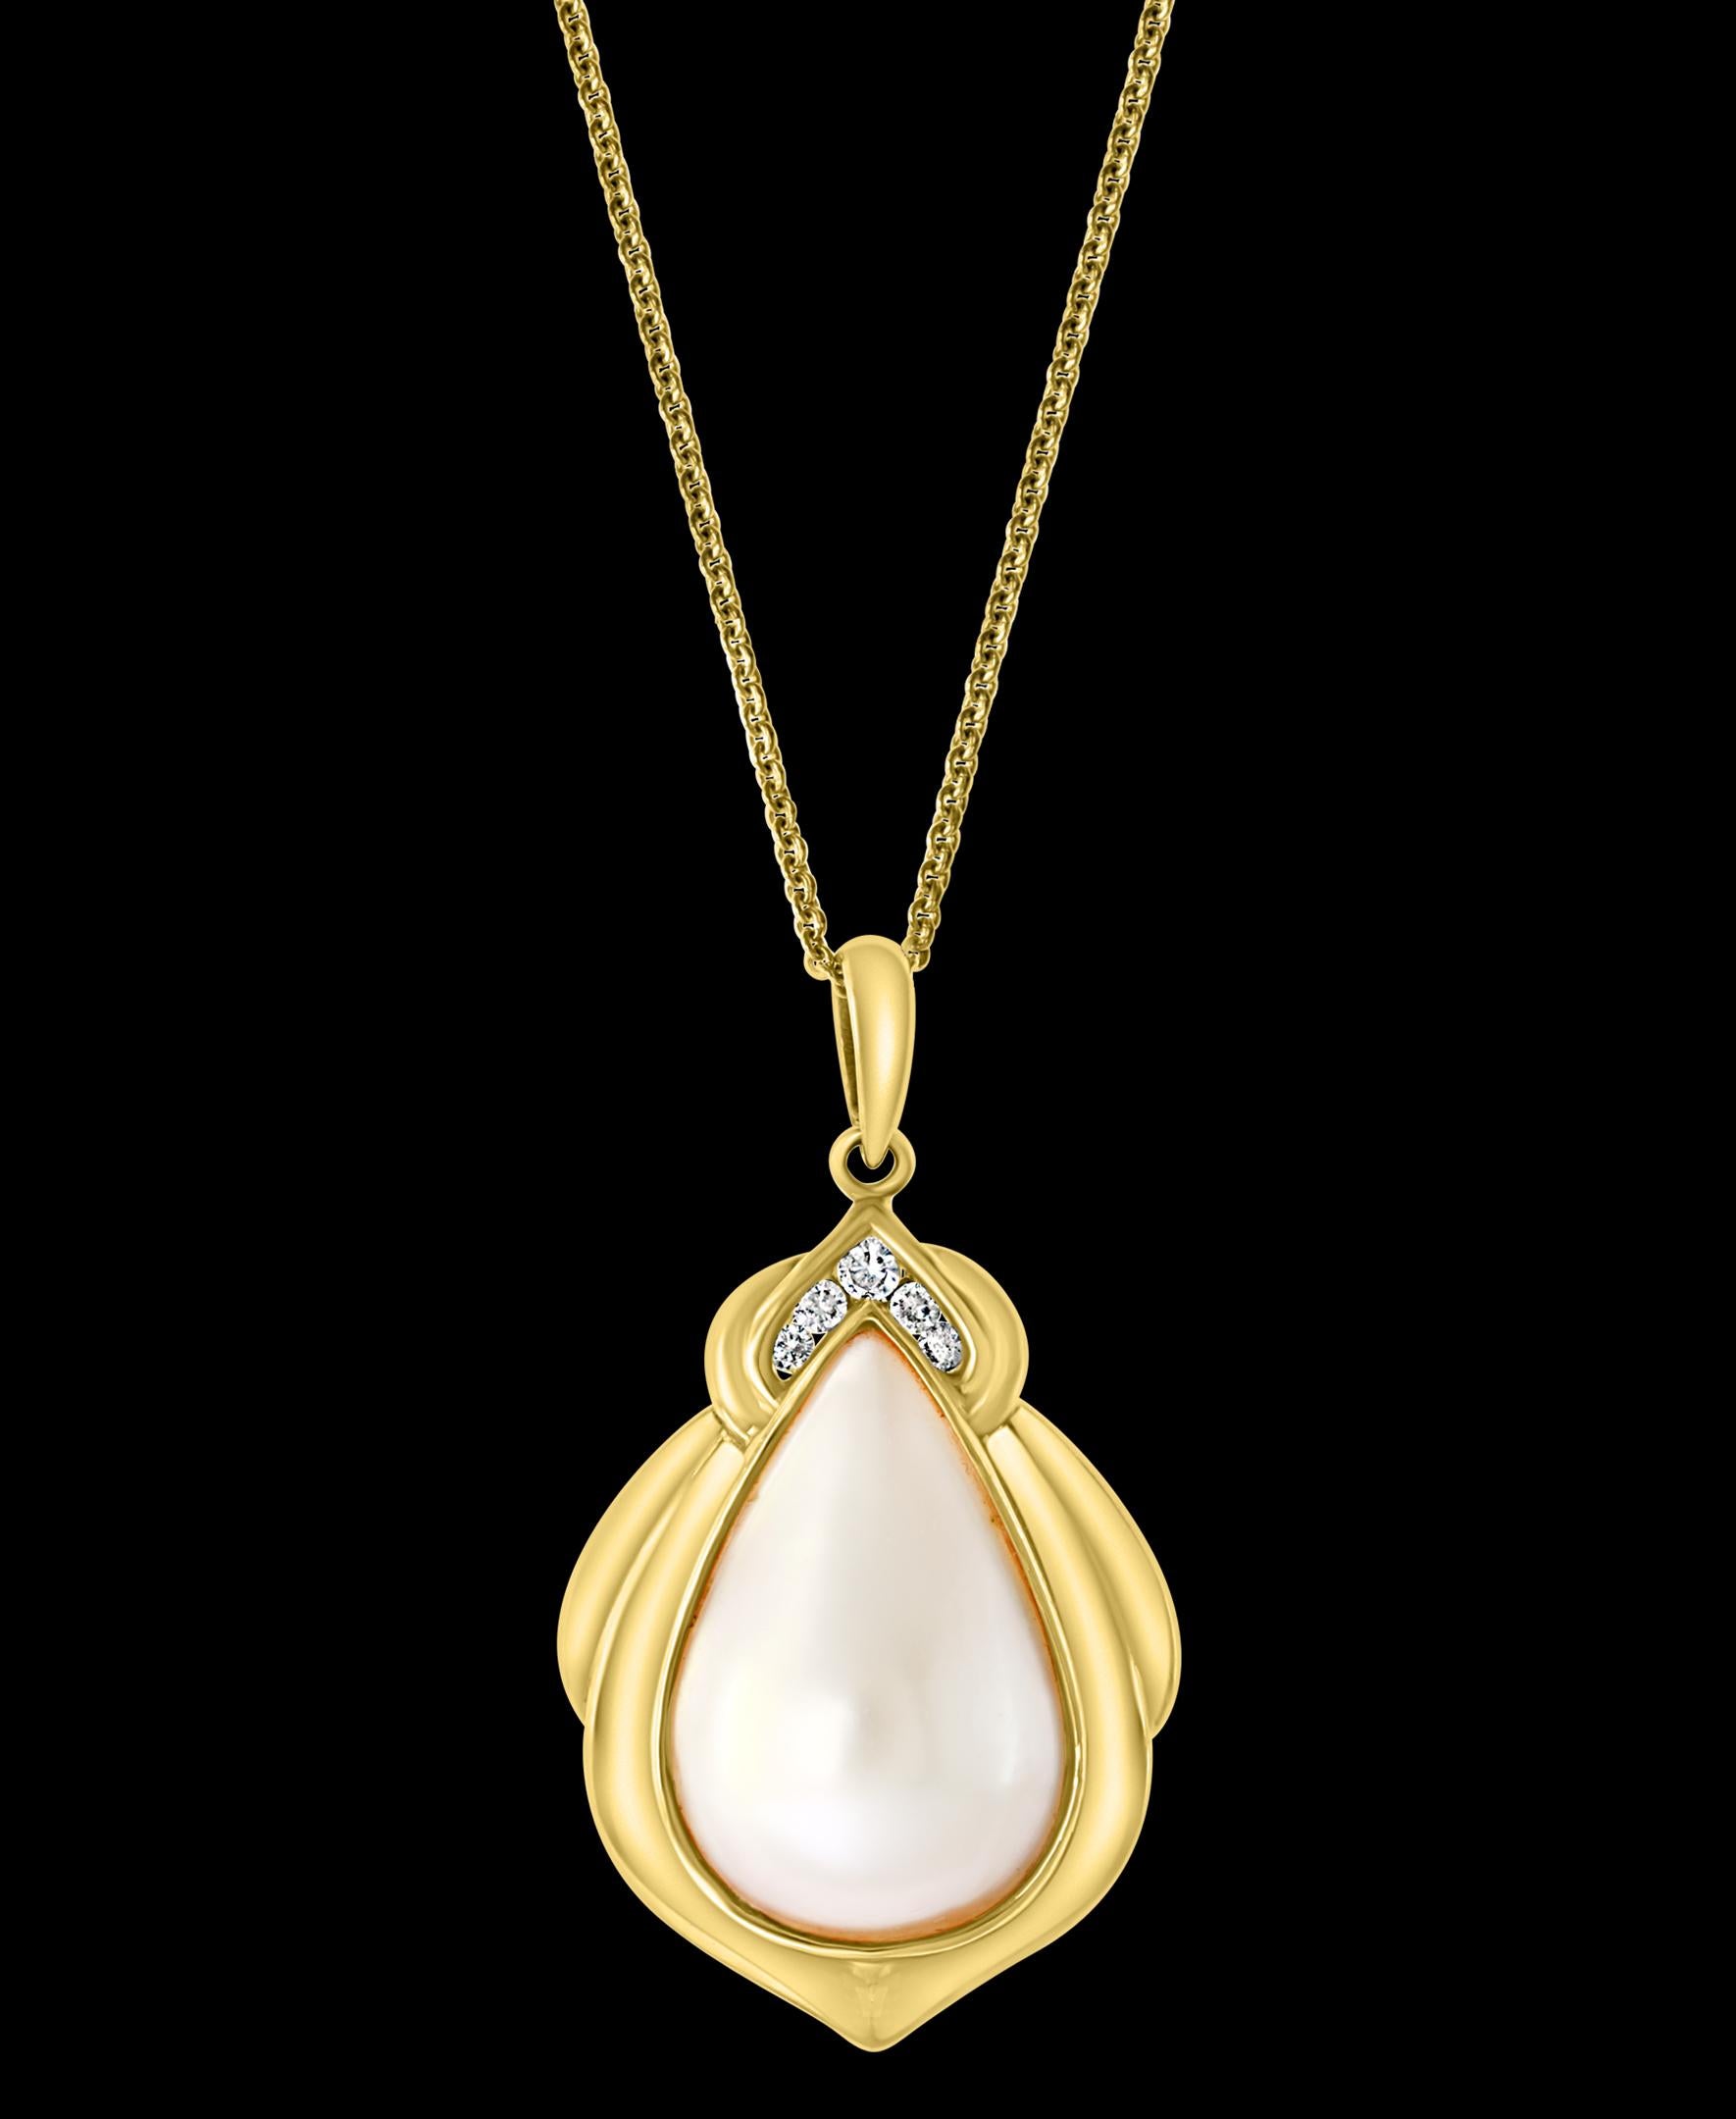 Pear Mabe Pearl And Diamond  Pendant/ Necklace 14 Karat Yellow Gold With Chain

15 mm wide and 22 mm tall pear shape mabe pearl with 5 diamonds approximately 0.25 ct 
Diamonds are eye clean quality with shine 
14 K gold Weight  7.7 Grams with